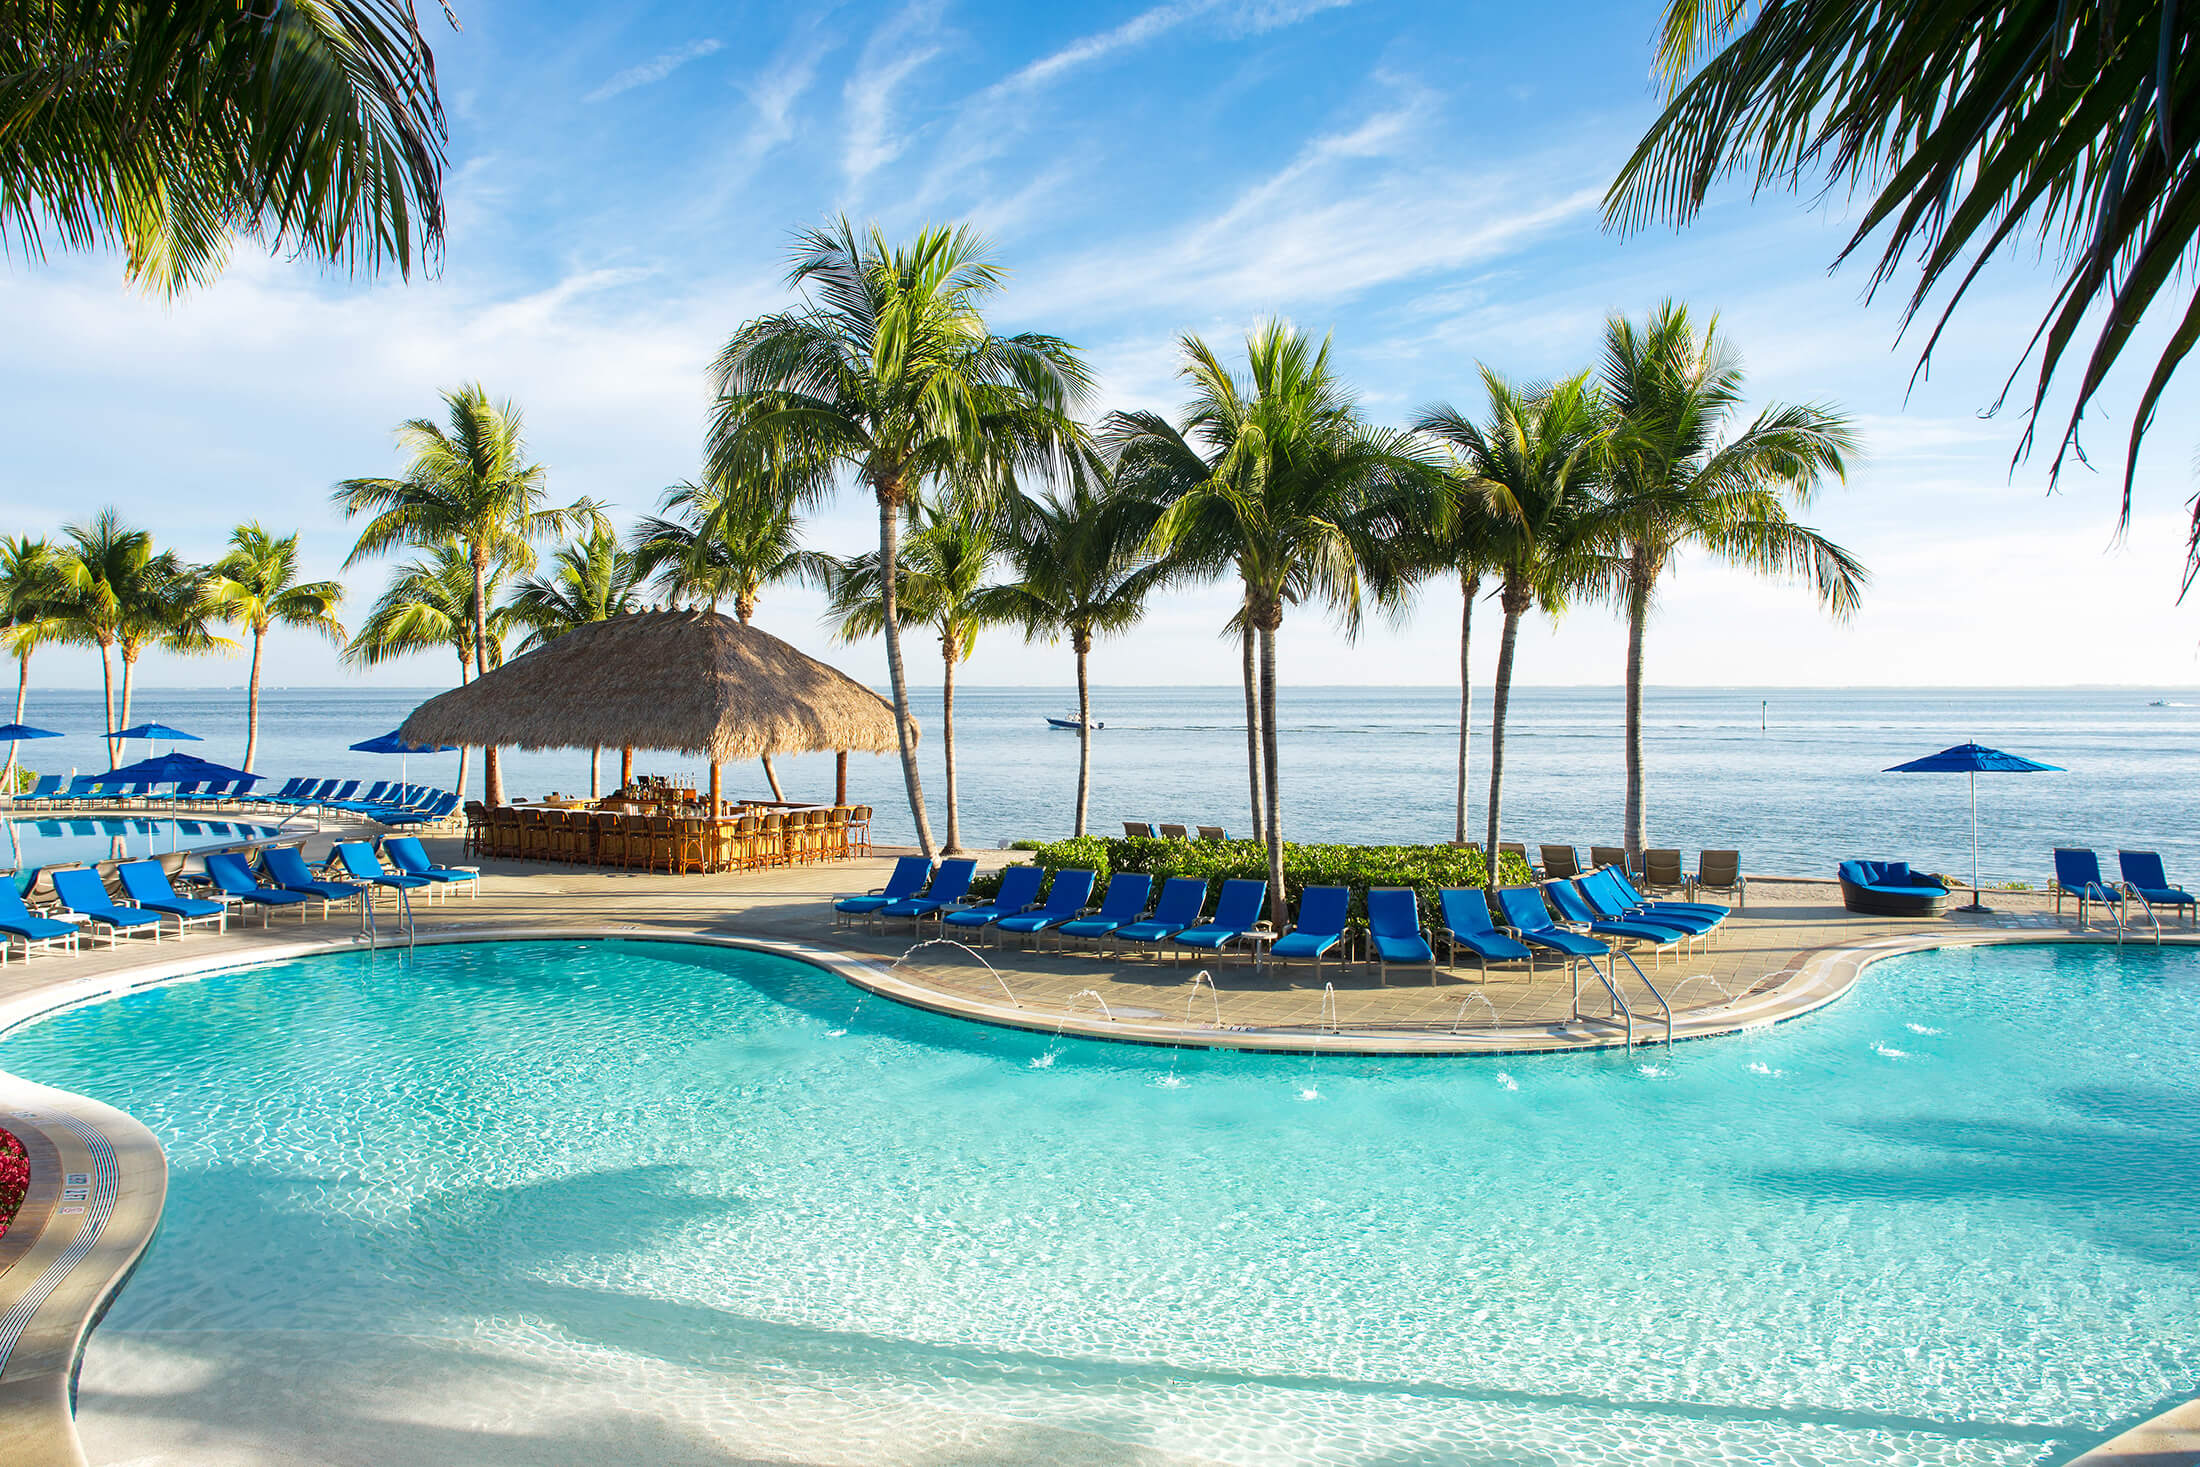 An ocean-side pool nestled between palm trees and beach chairs.